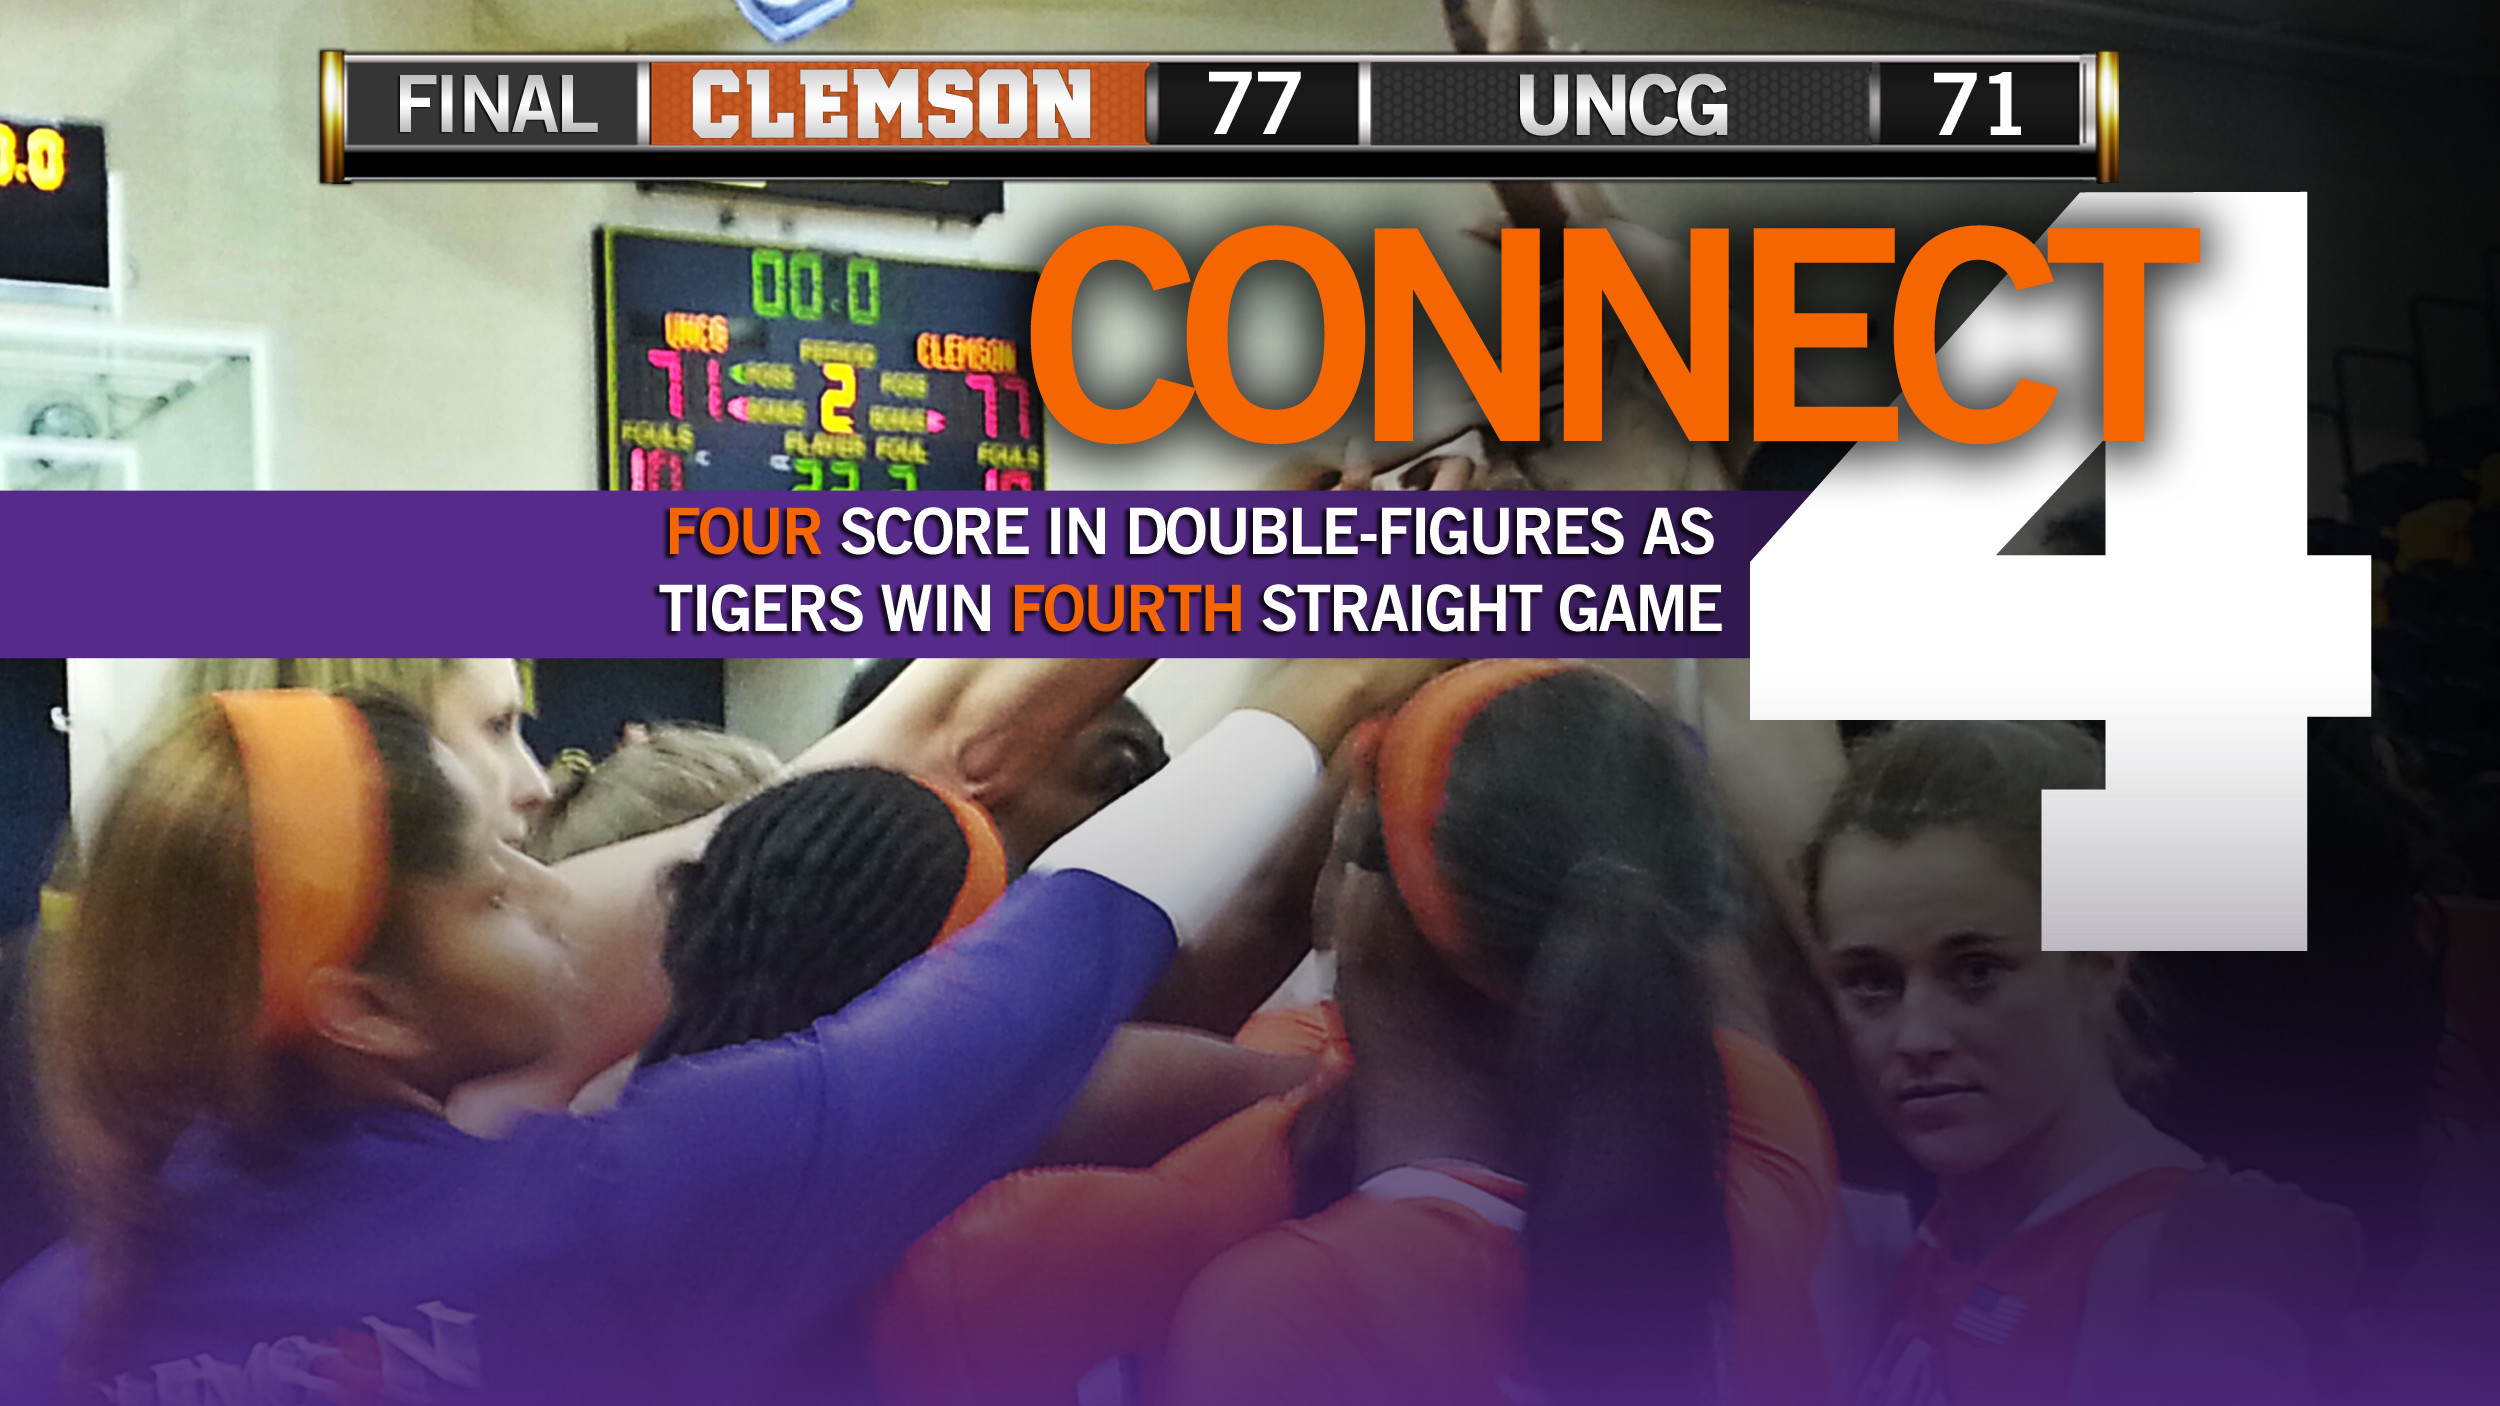 @ClemsonWBB Win Streak up to Four with 77-71 Victory at UNCG